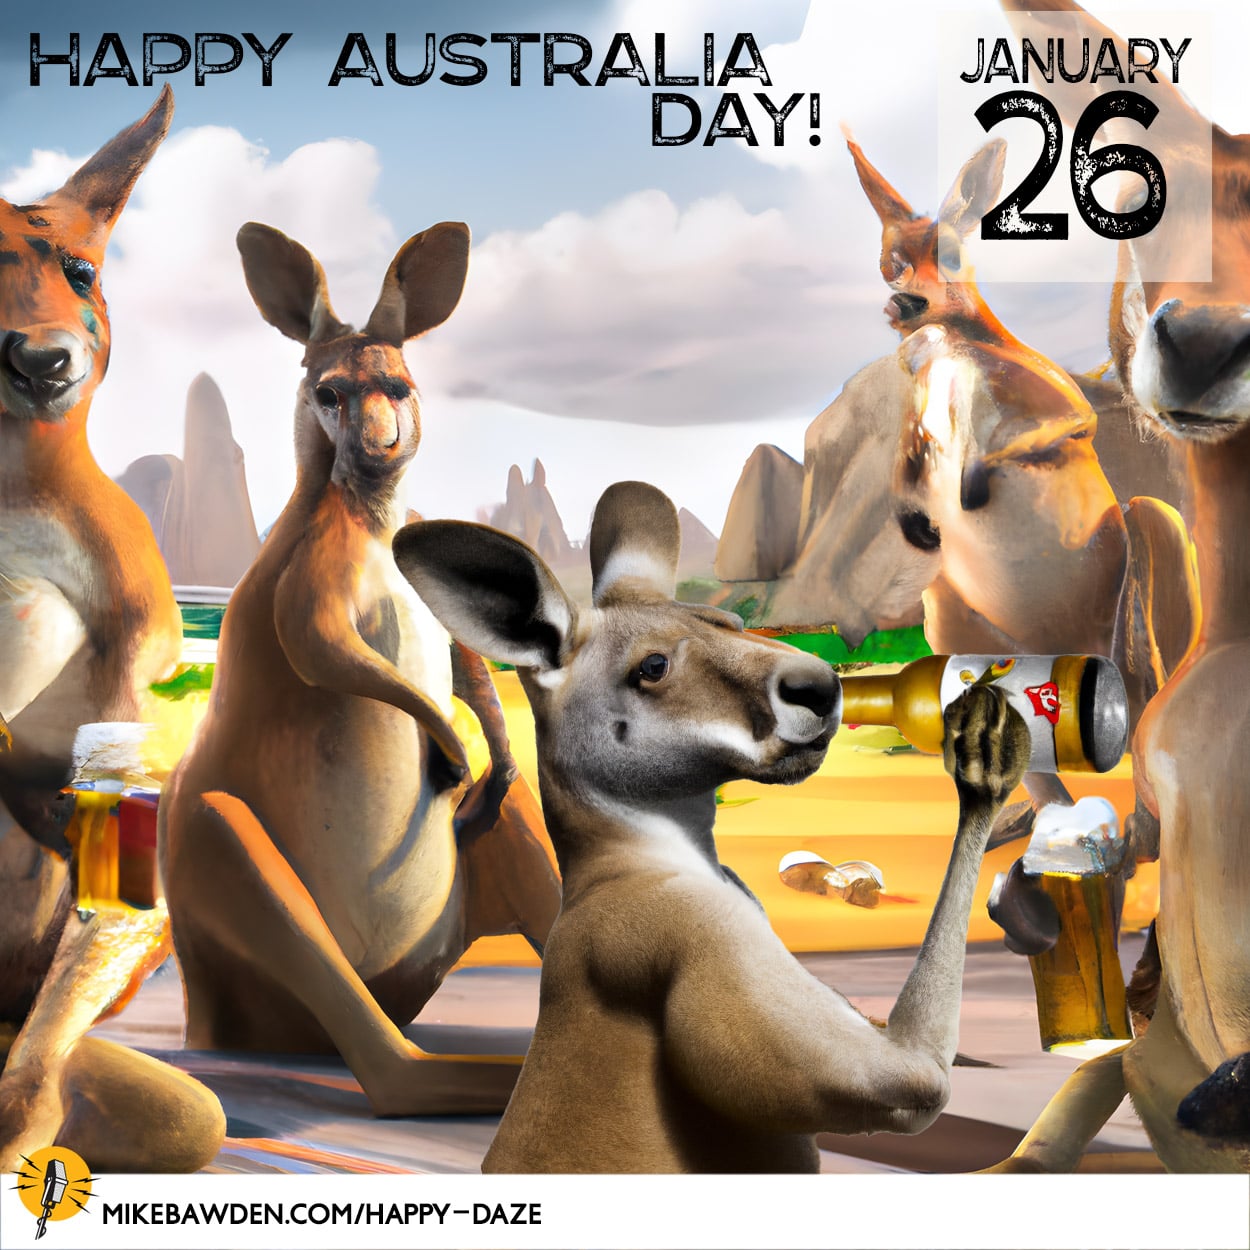 Time for a party in the land down under!